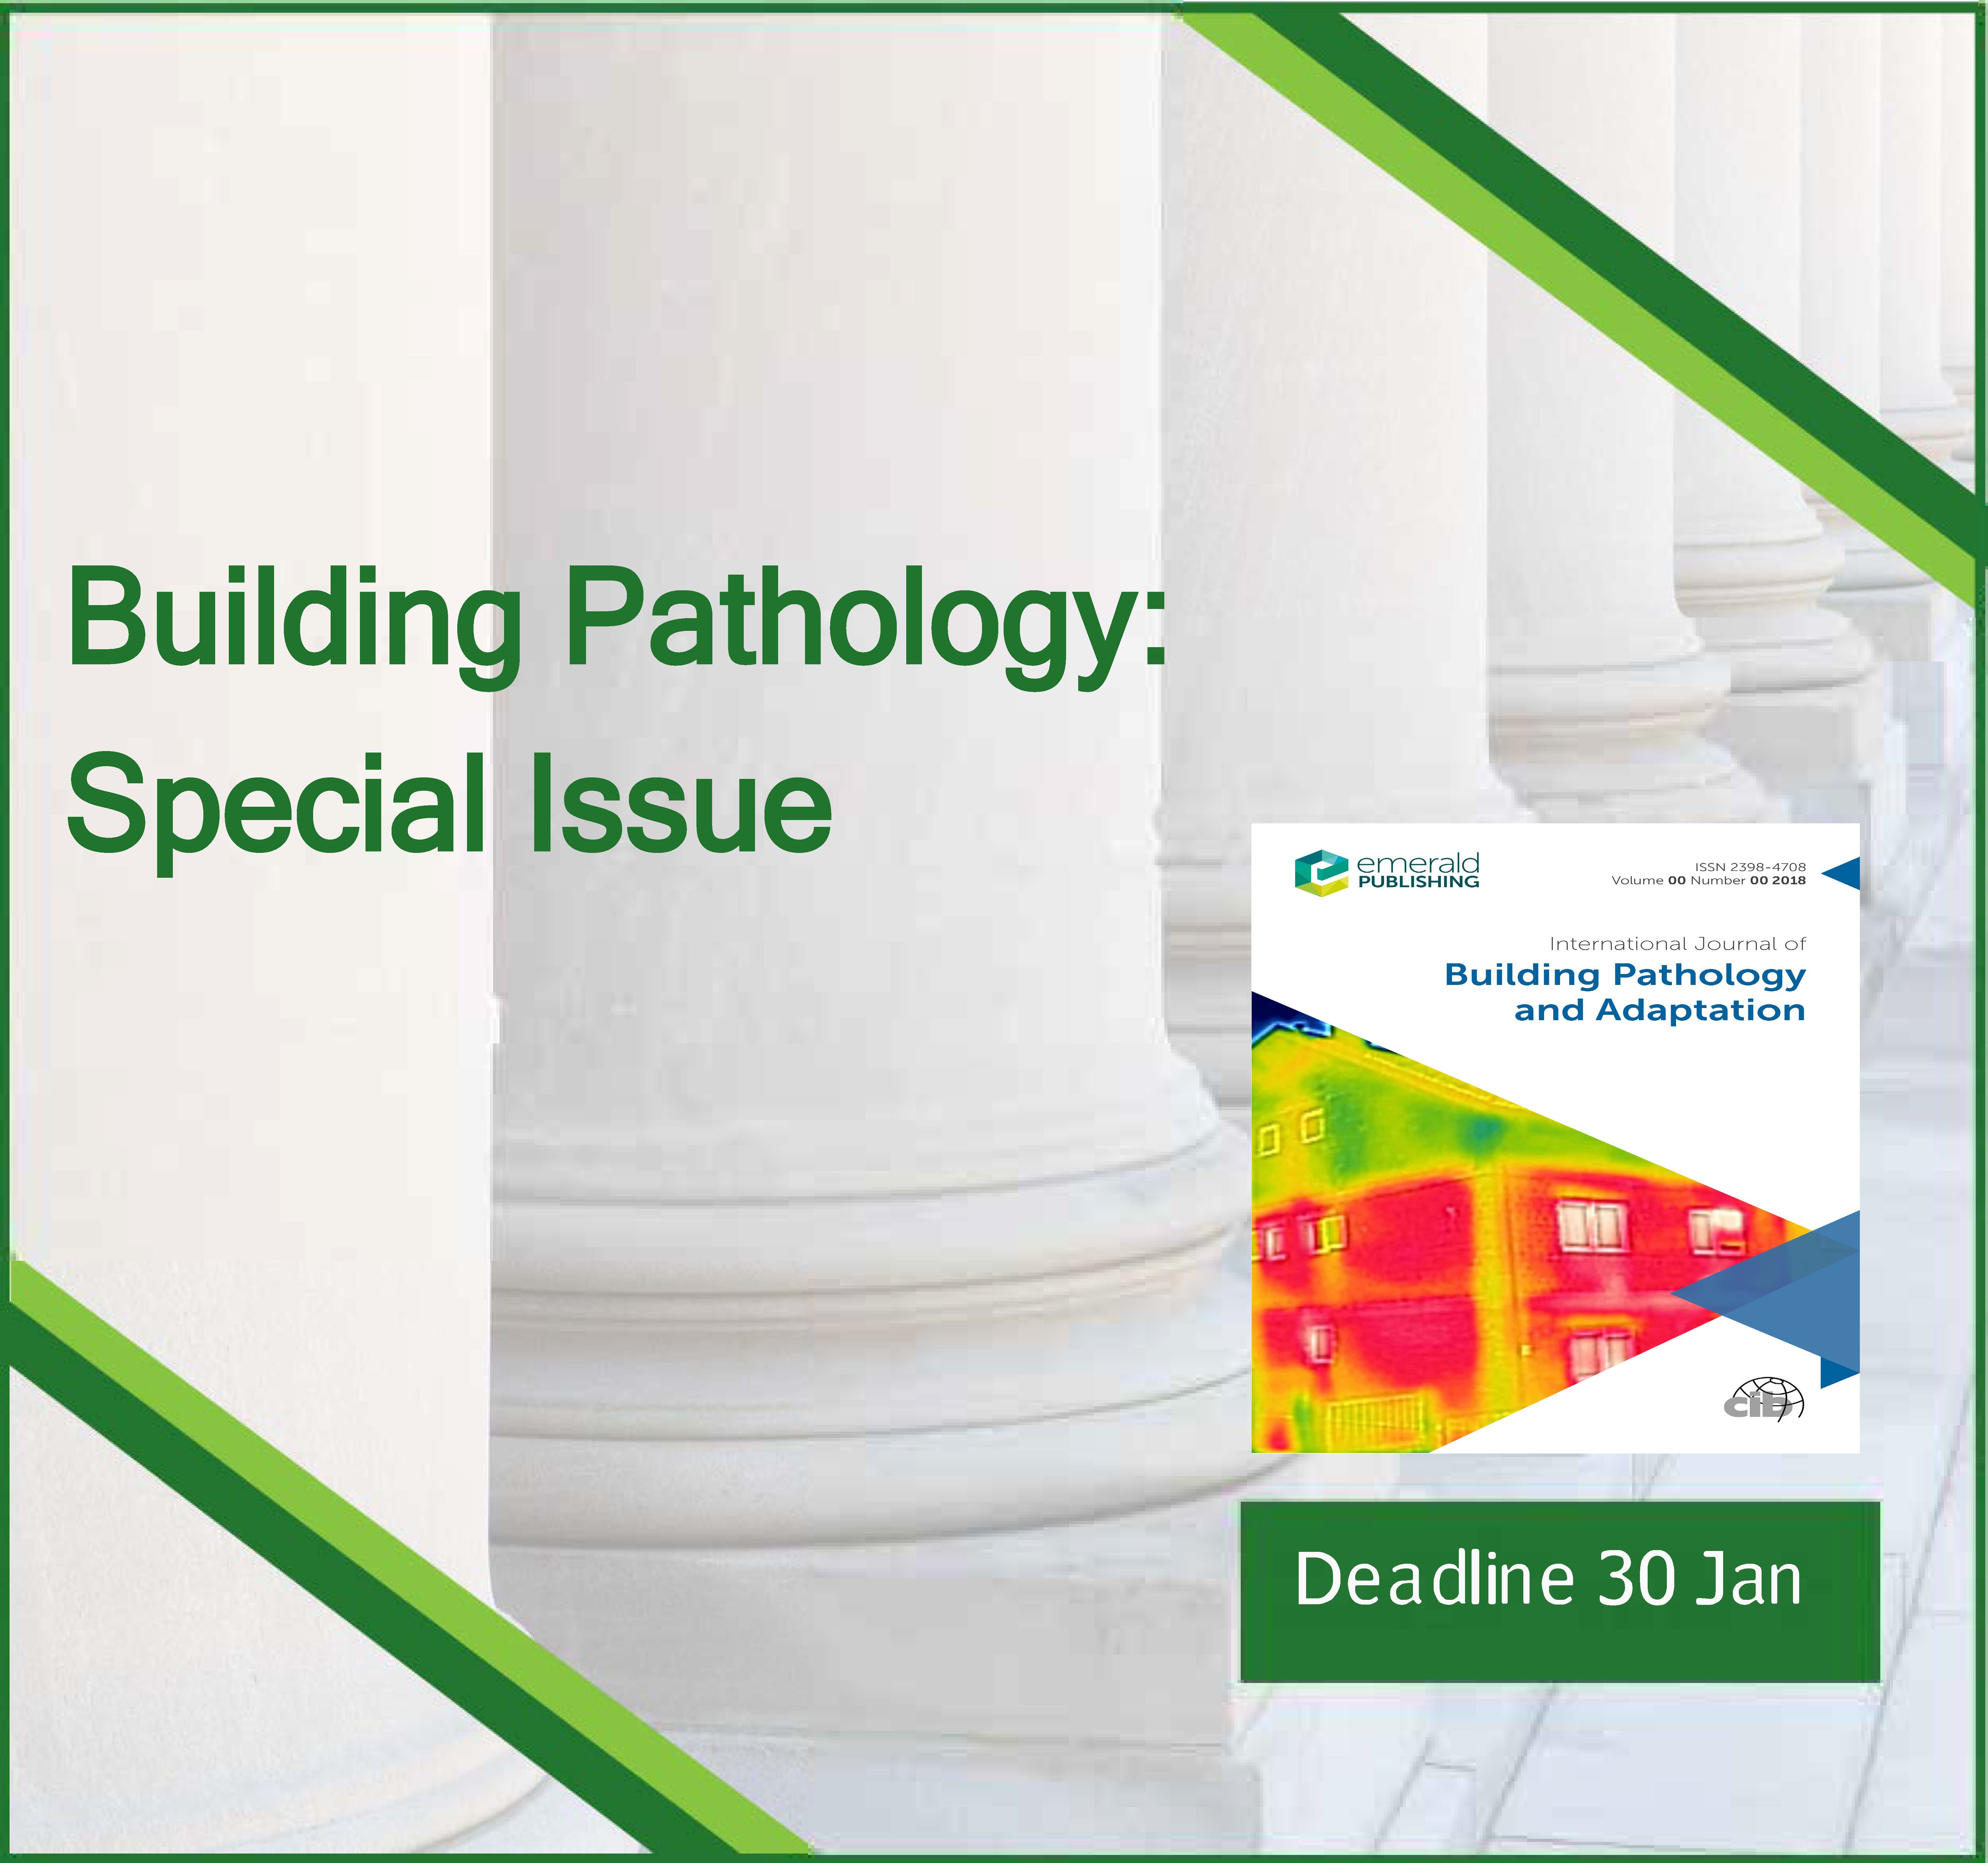 Building Pathology: The past, new approaches and opportunities